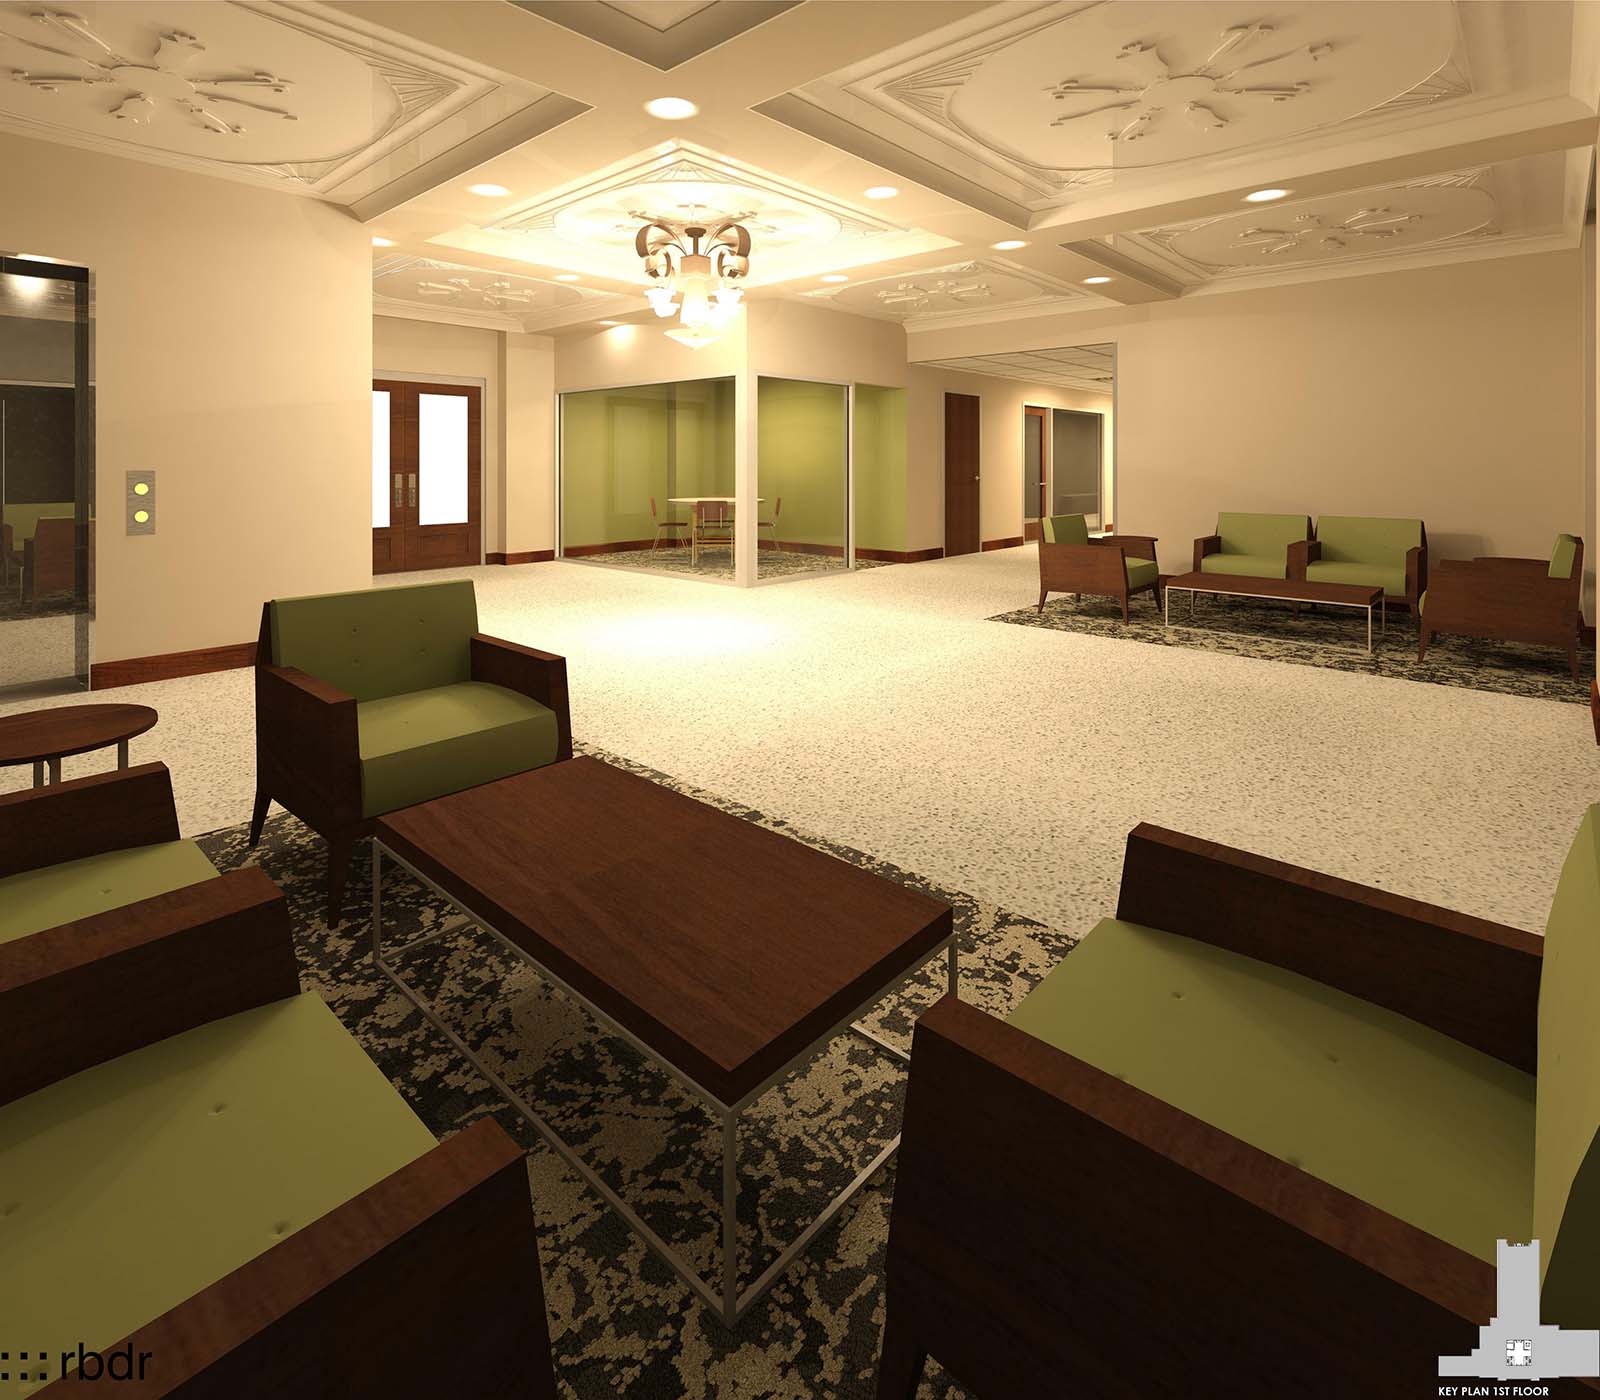 Tidwell Bible Building first floor architectural rendering